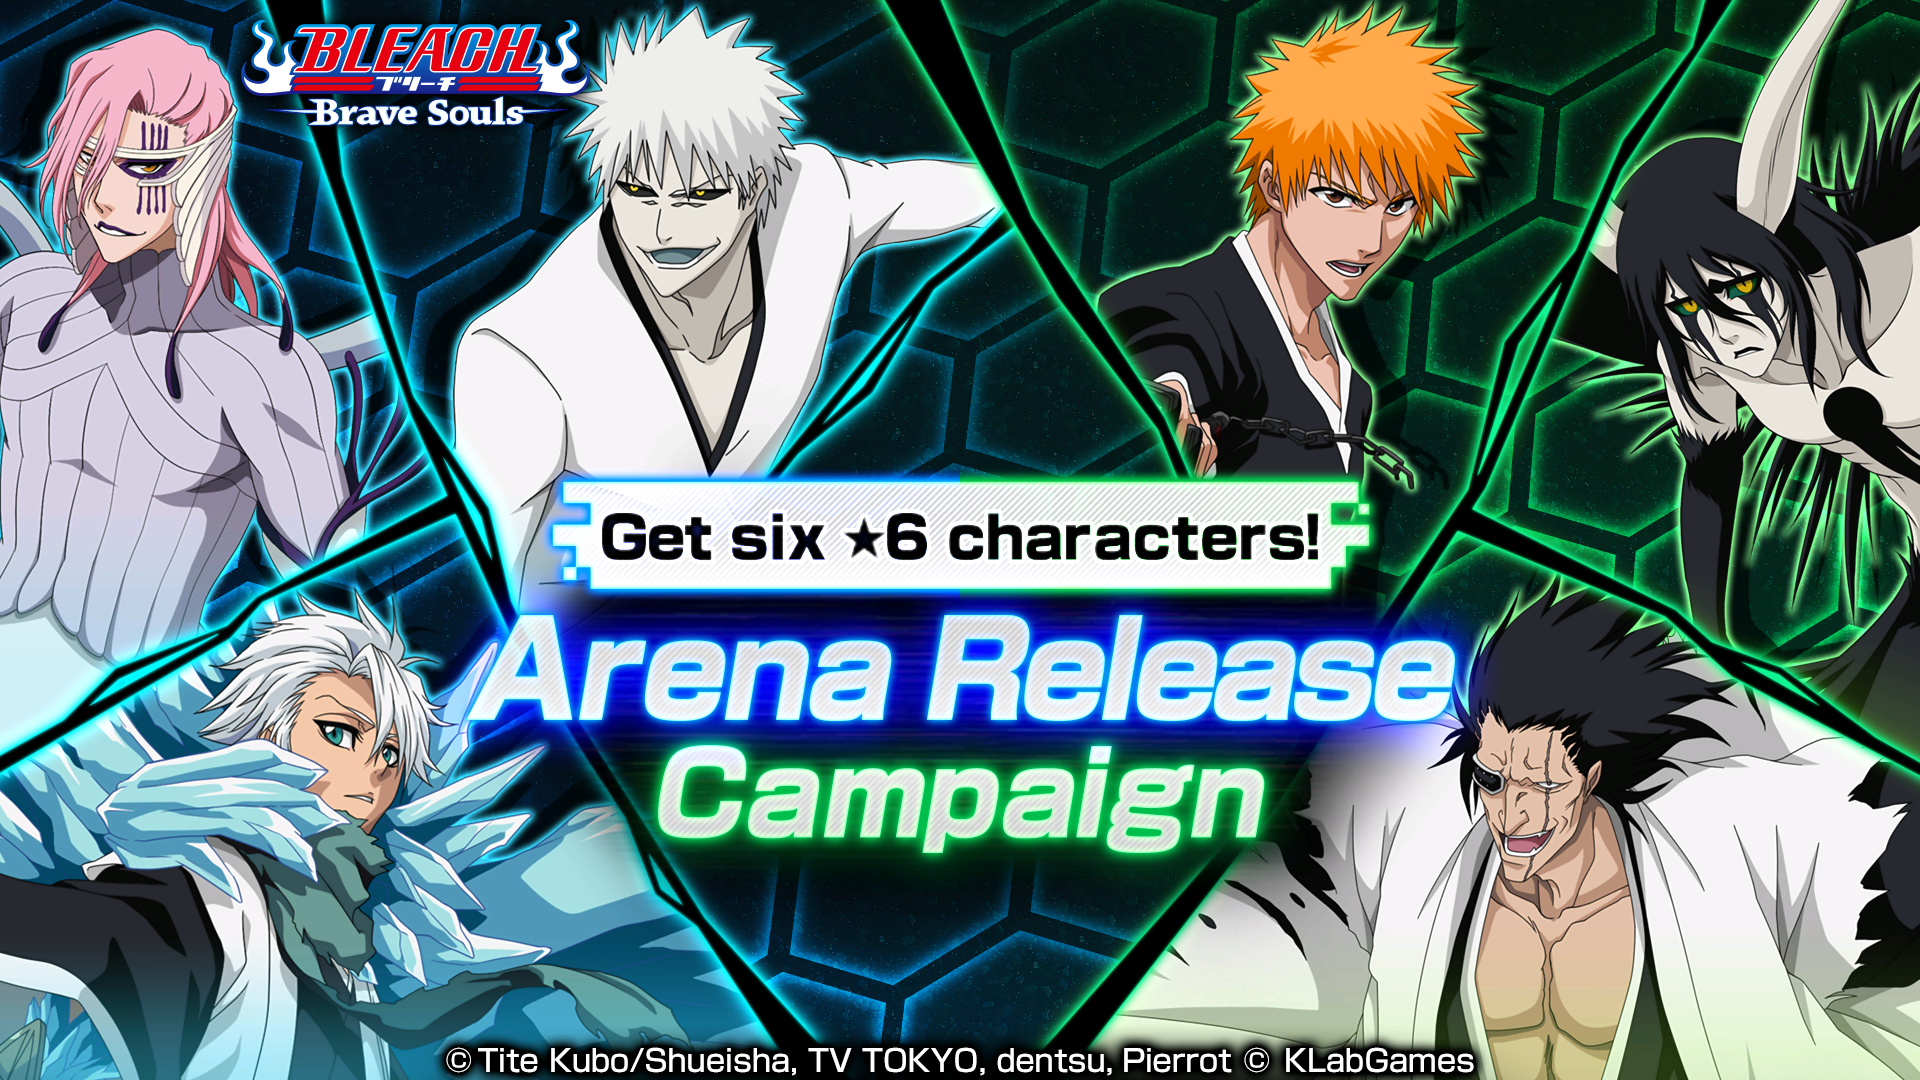 "Bleach: Brave Souls" New Arena Mode Launches! Take on the World in Real Time and Enjoy Celebration Campaigns!